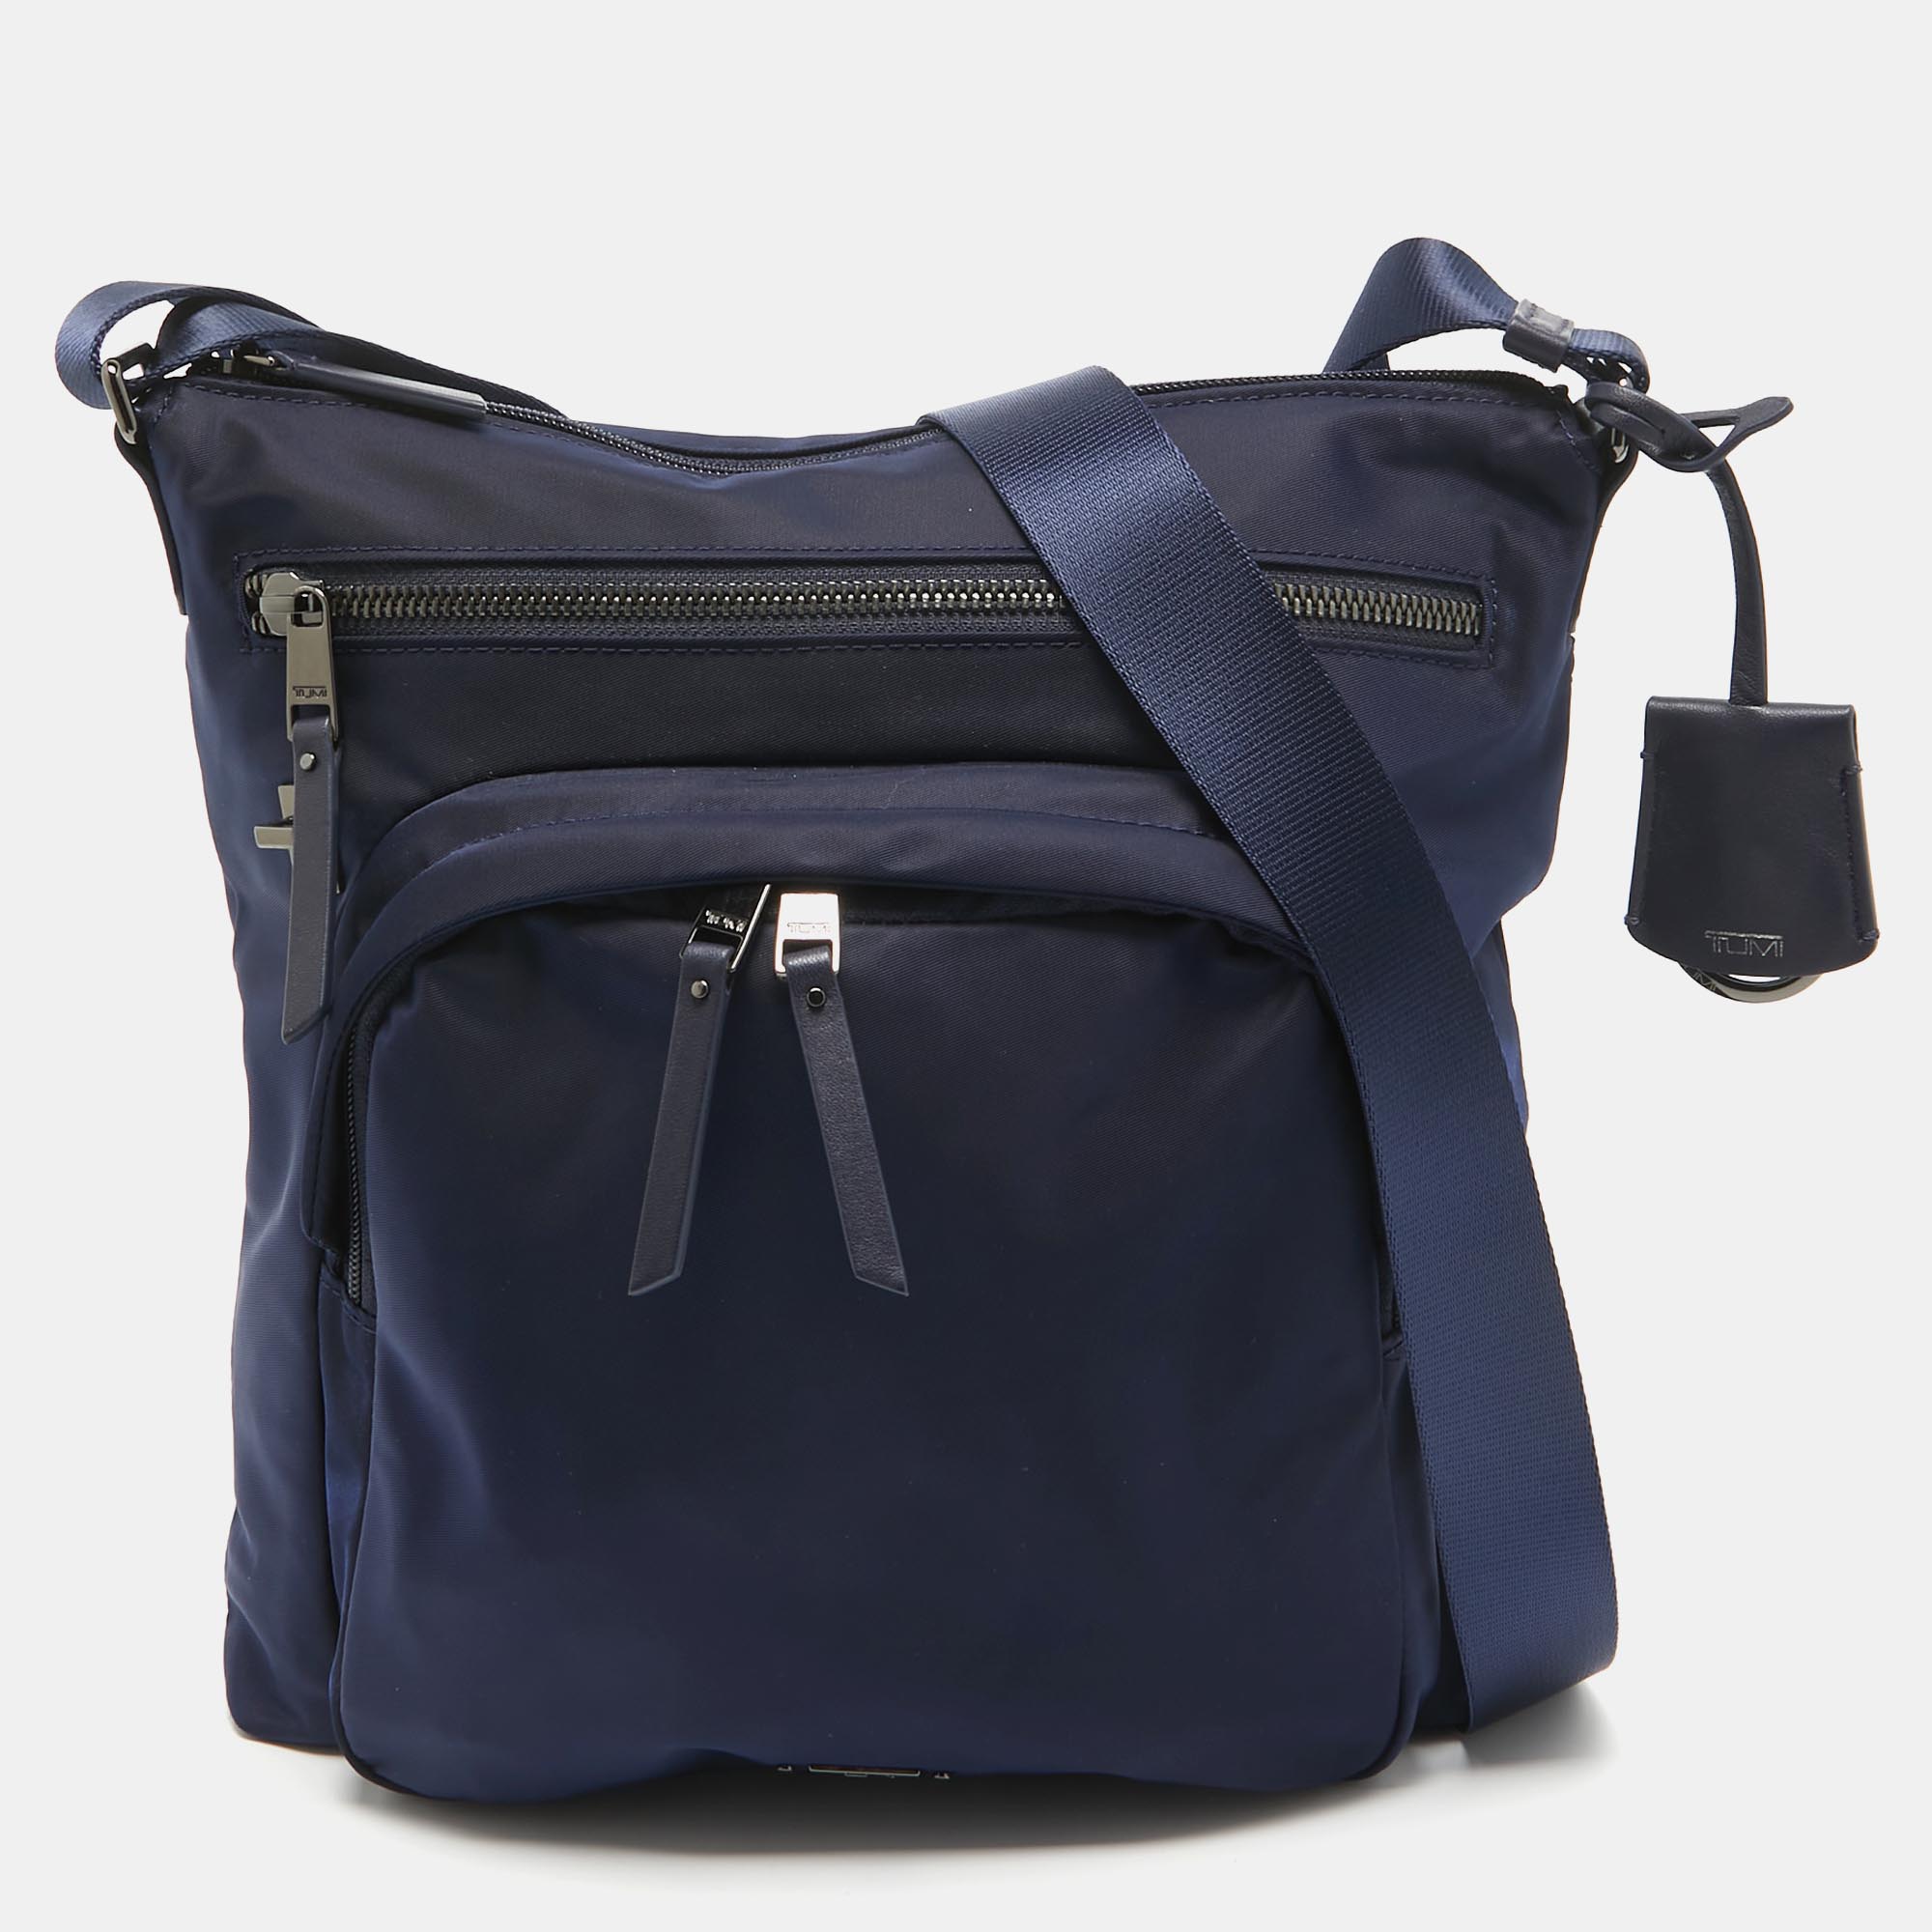 Trust messenger bags to offer functional ease and a comfortable carrying experience. Smartly designed the bag has an appealing exterior and a spacious interior. Perfect for work and weekend getaways.